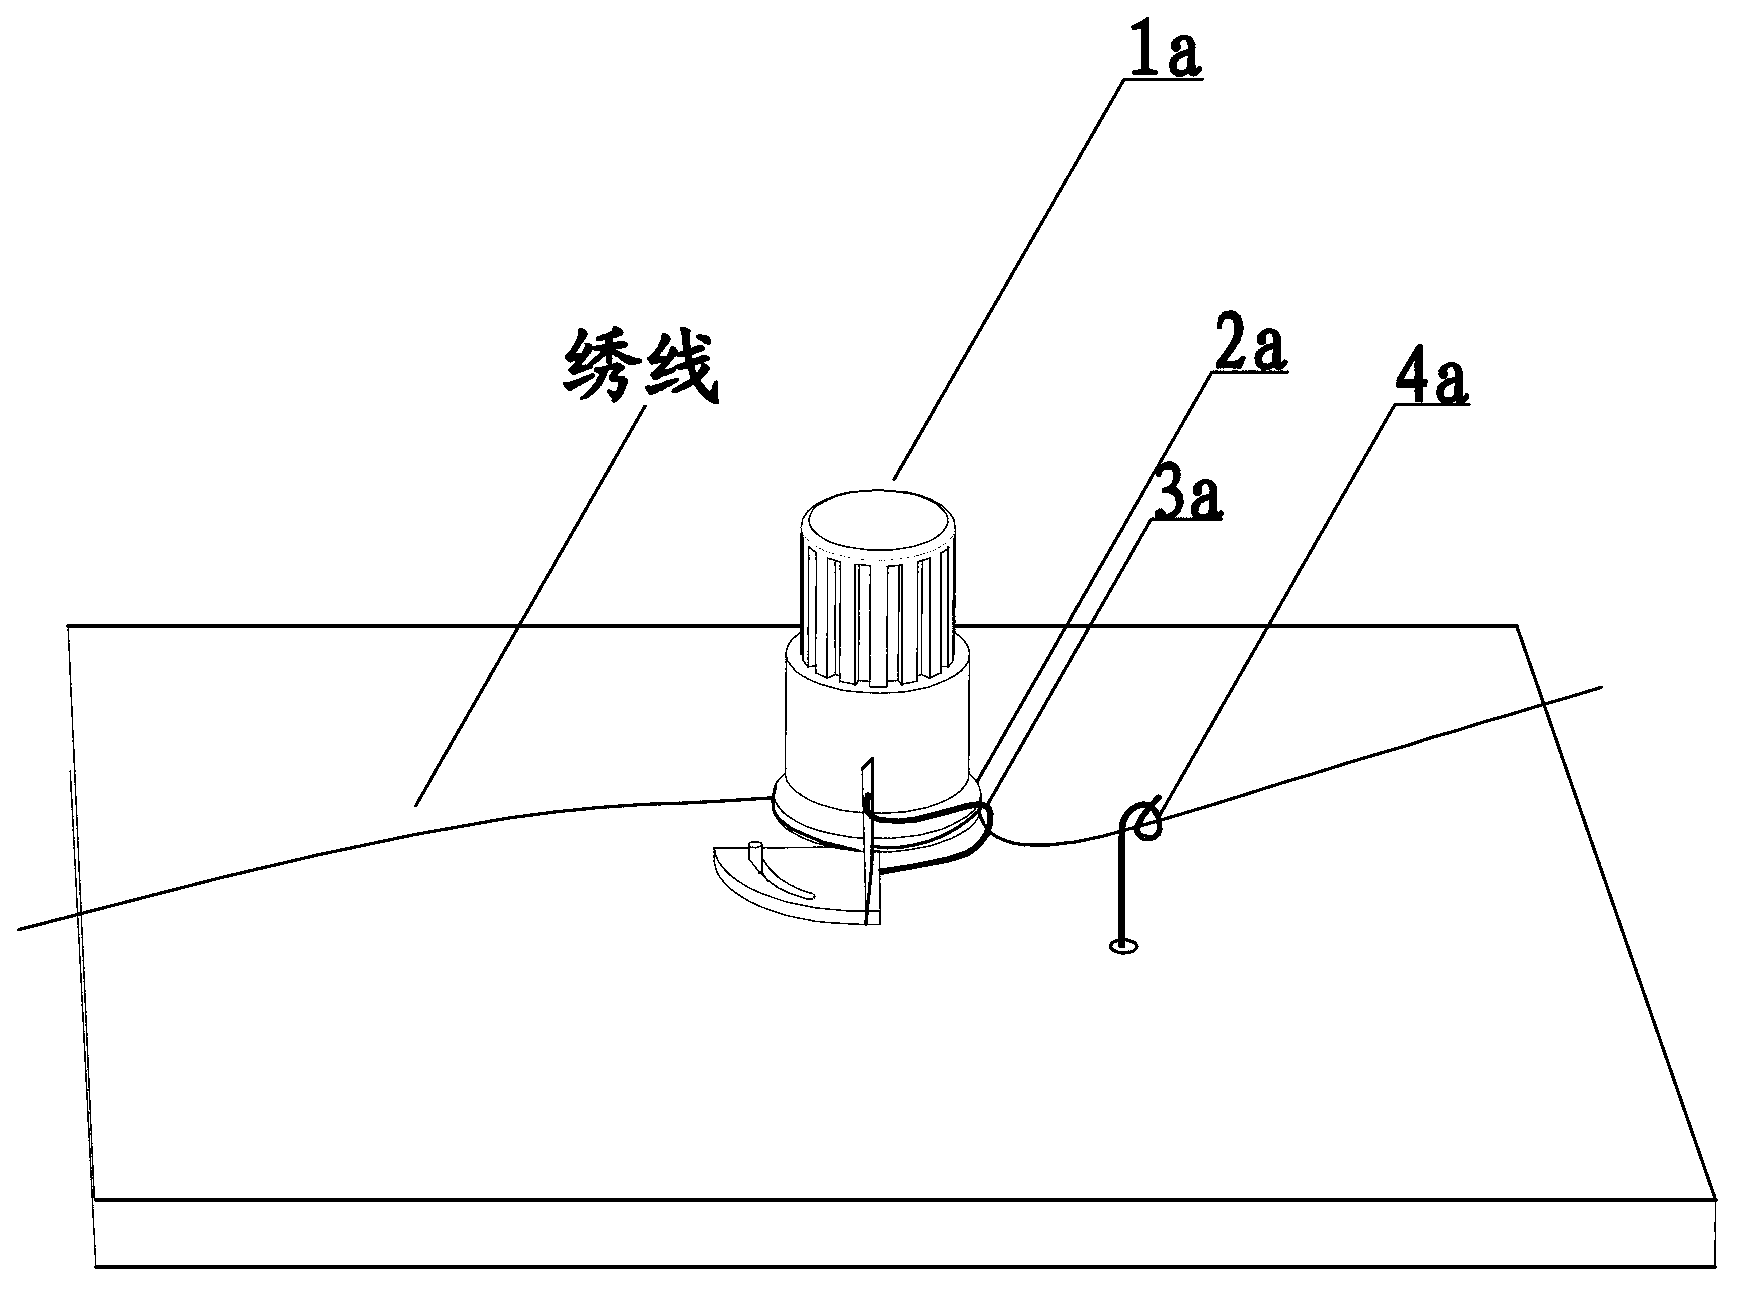 Alarm device for embroidery machine